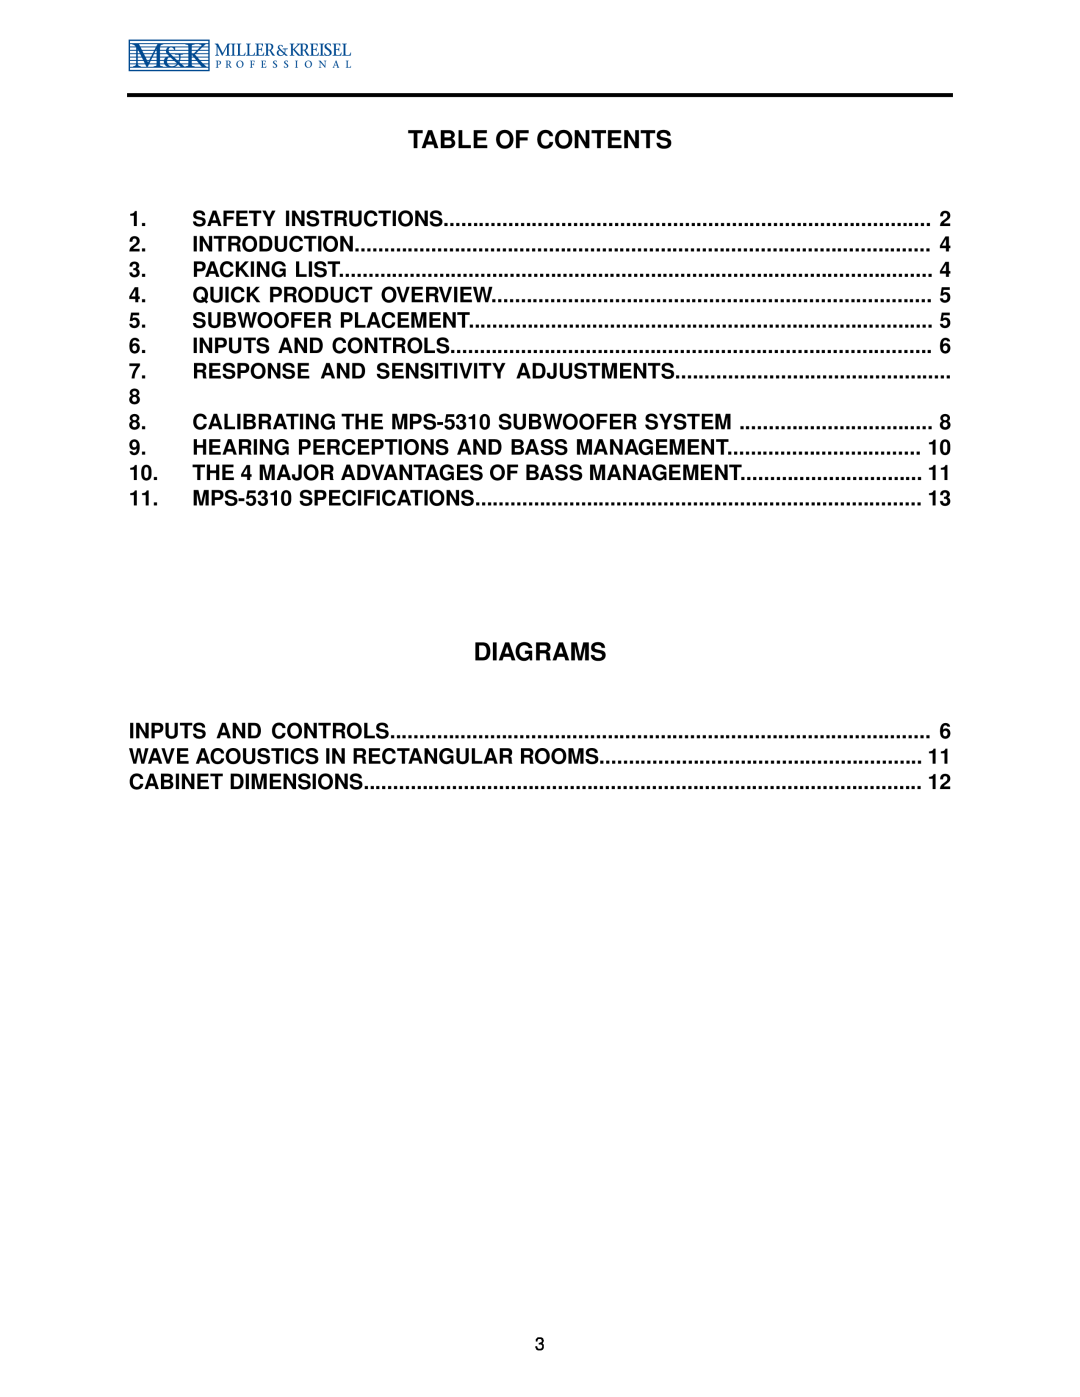 MK Sound MPS-5410, MPS-5310 operation manual Table Of Contents, Diagrams 